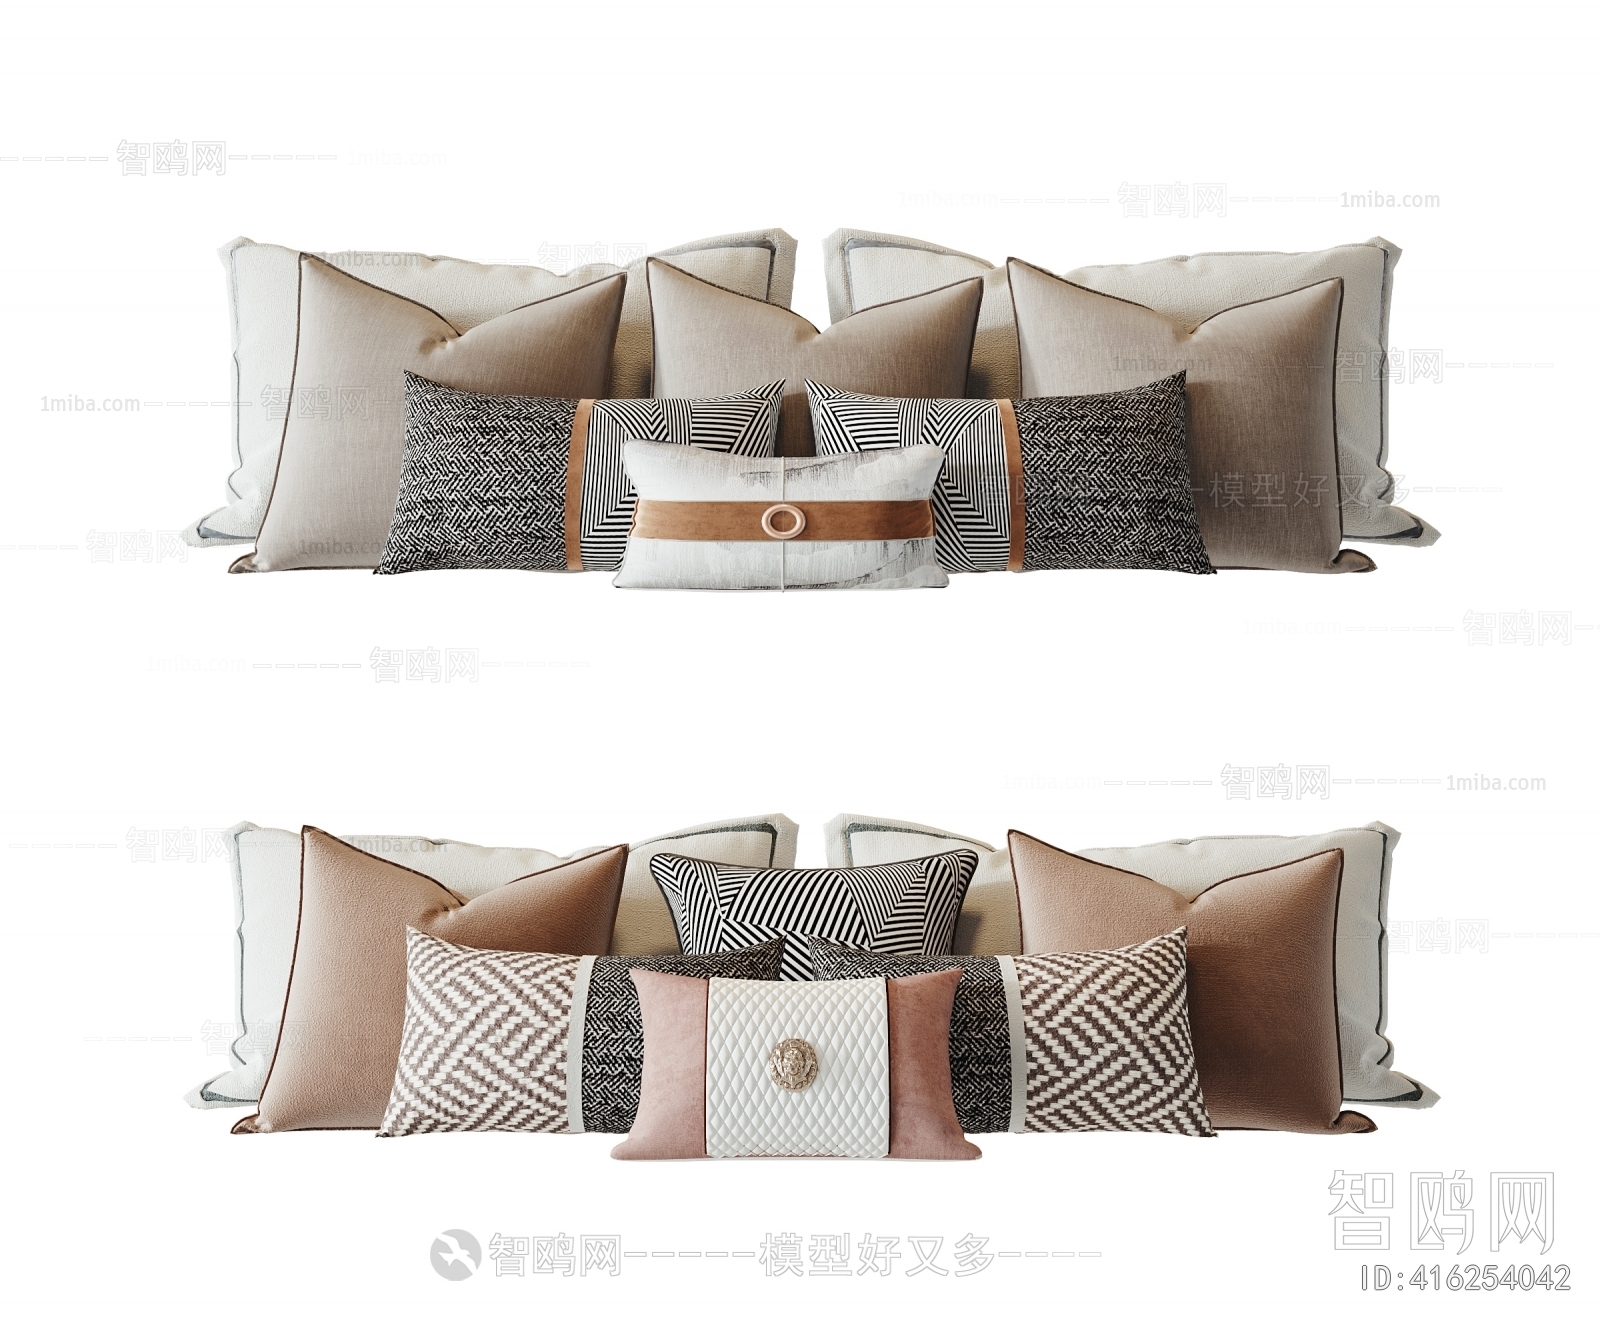 New Chinese Style Pillow